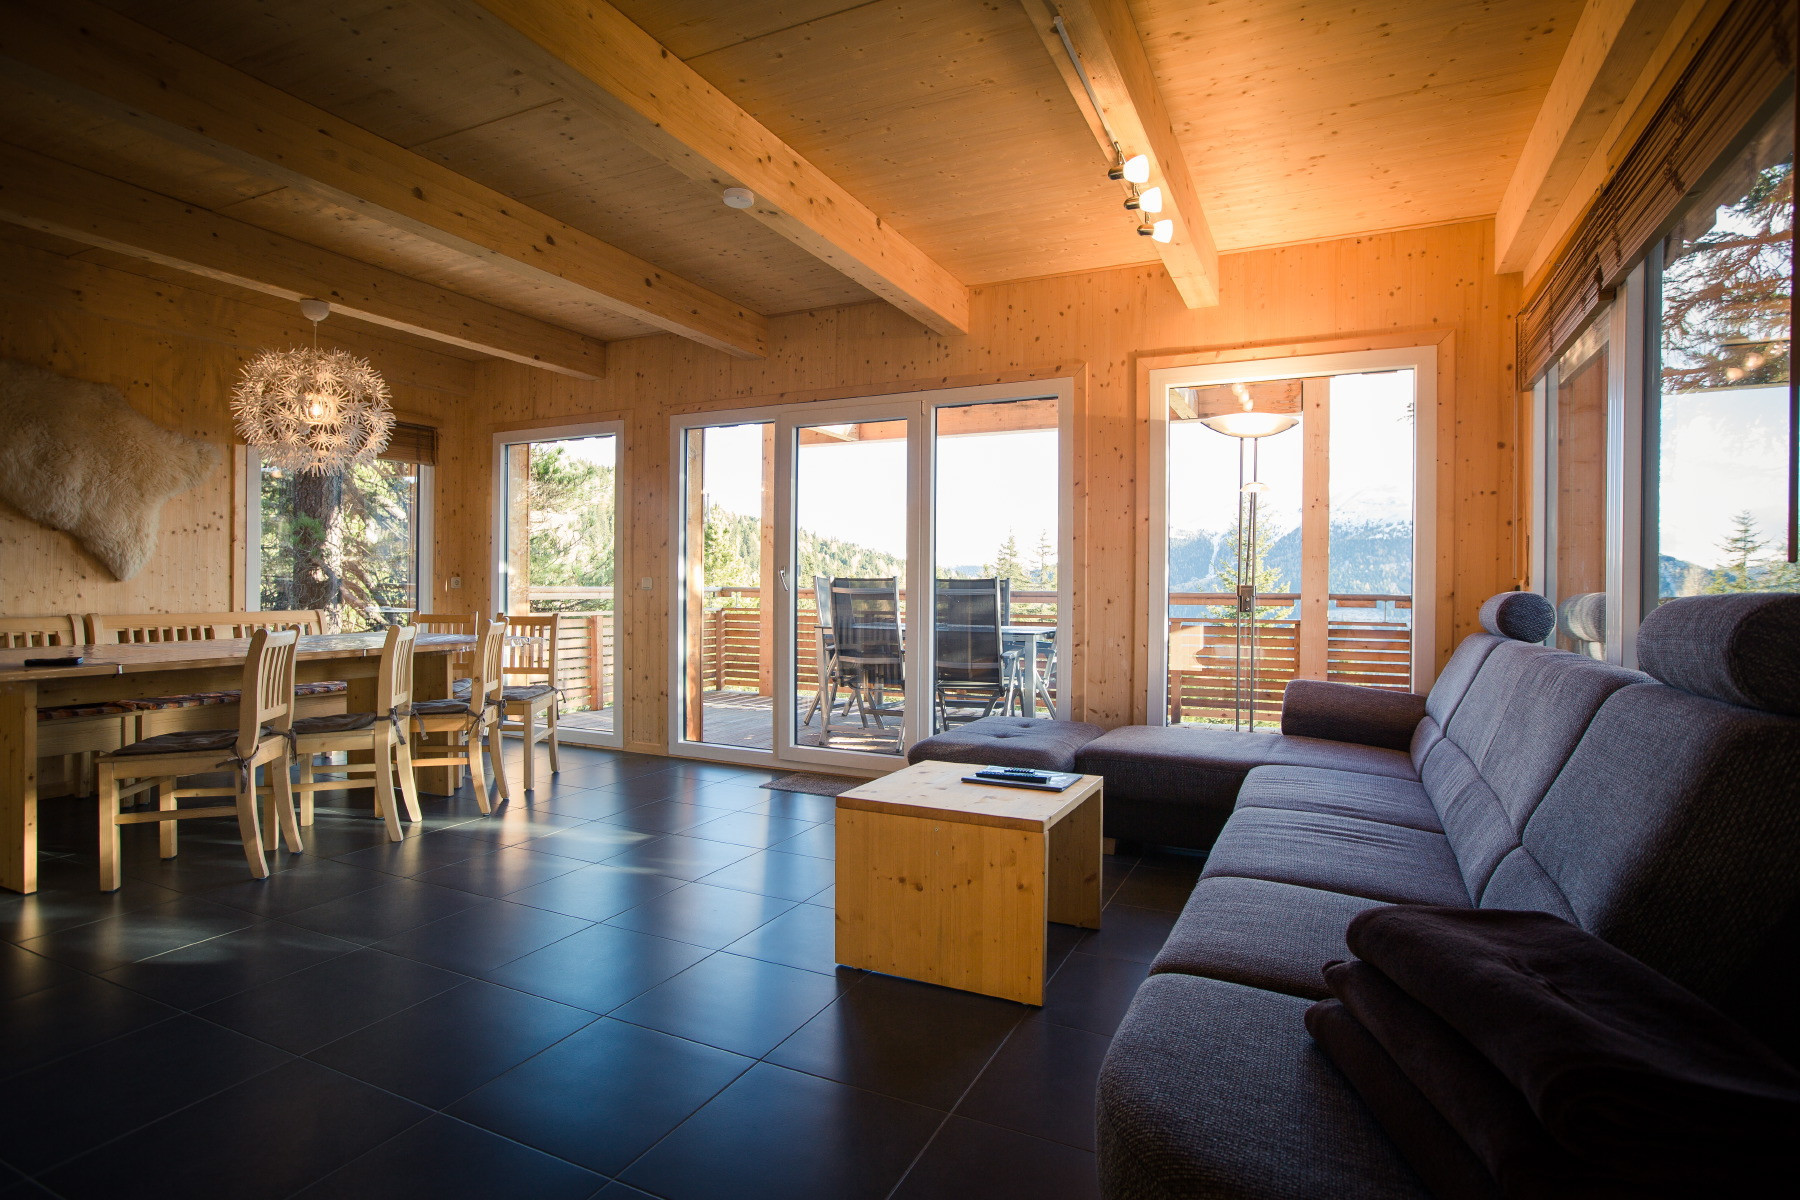  in Turrach - Chalet #47 with IR-sauna and indoor whirlpool